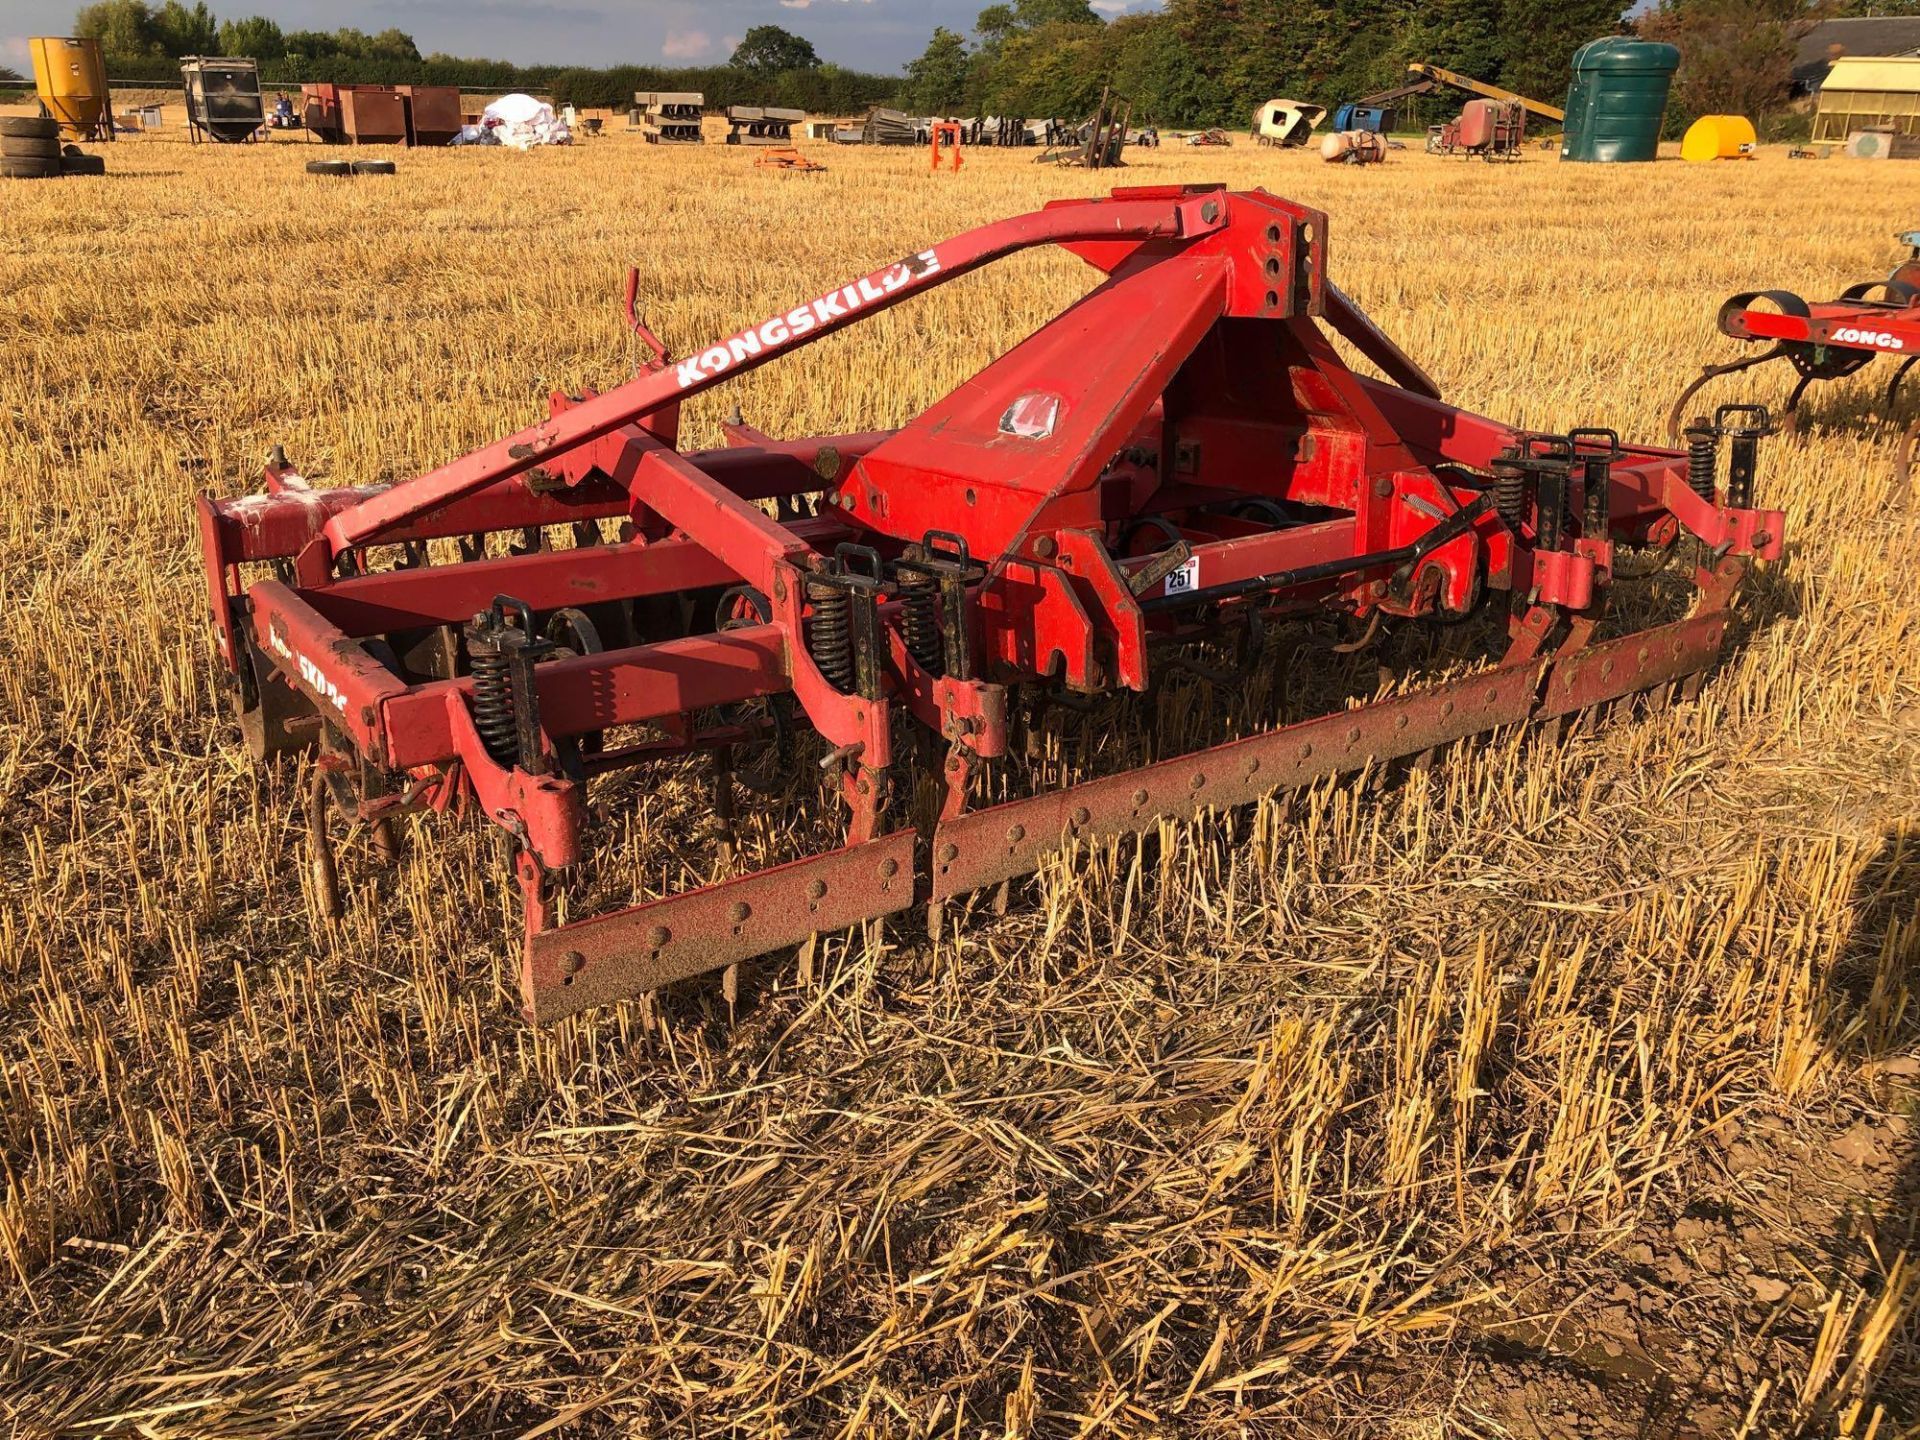 Kongskilde 3m linkage mounted spring tine cultivator with front levelling board and rear packer roll